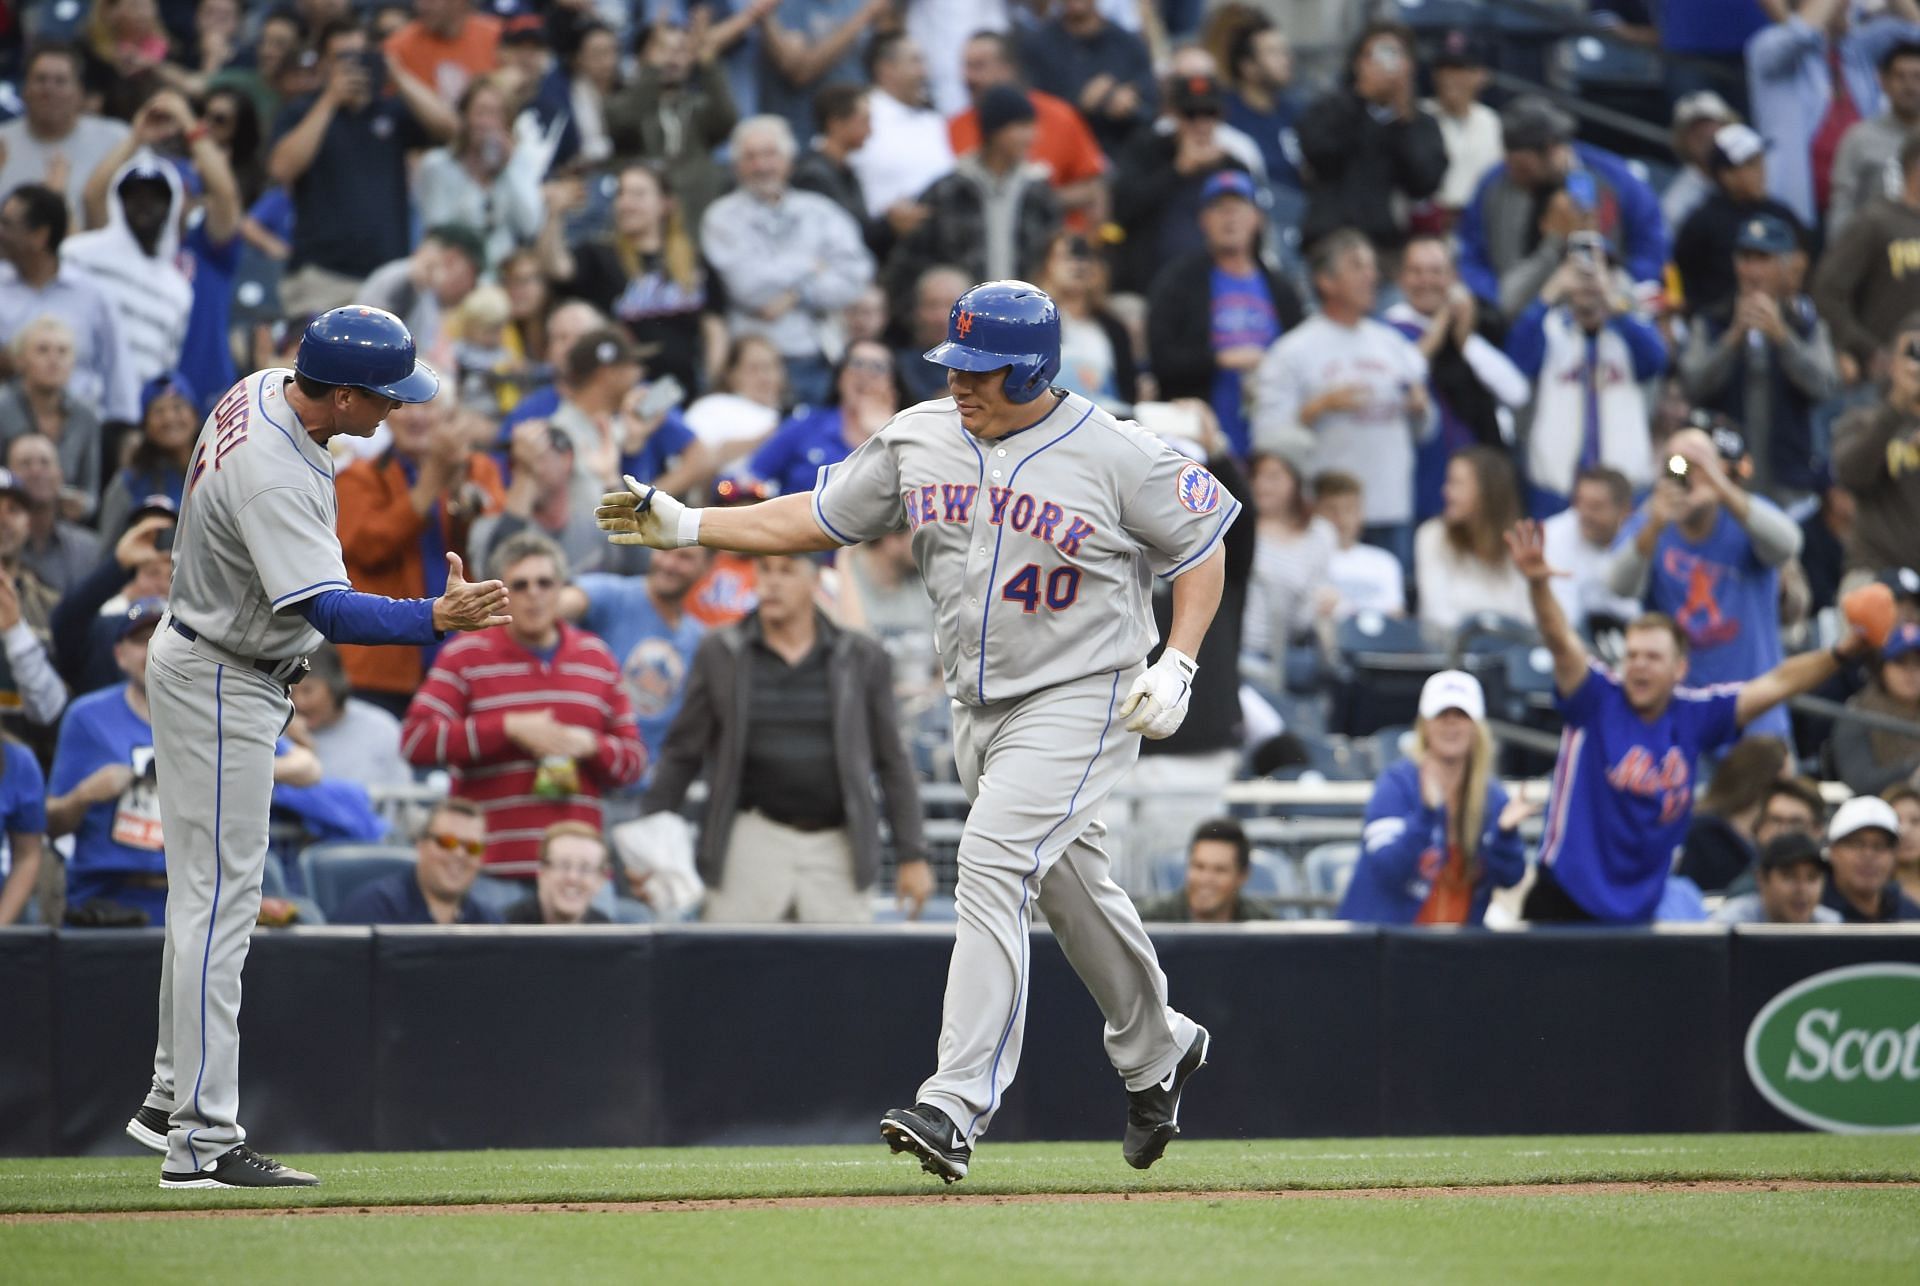 Bartolo Colon Hits First Career Home Run Against Padres - WSJ